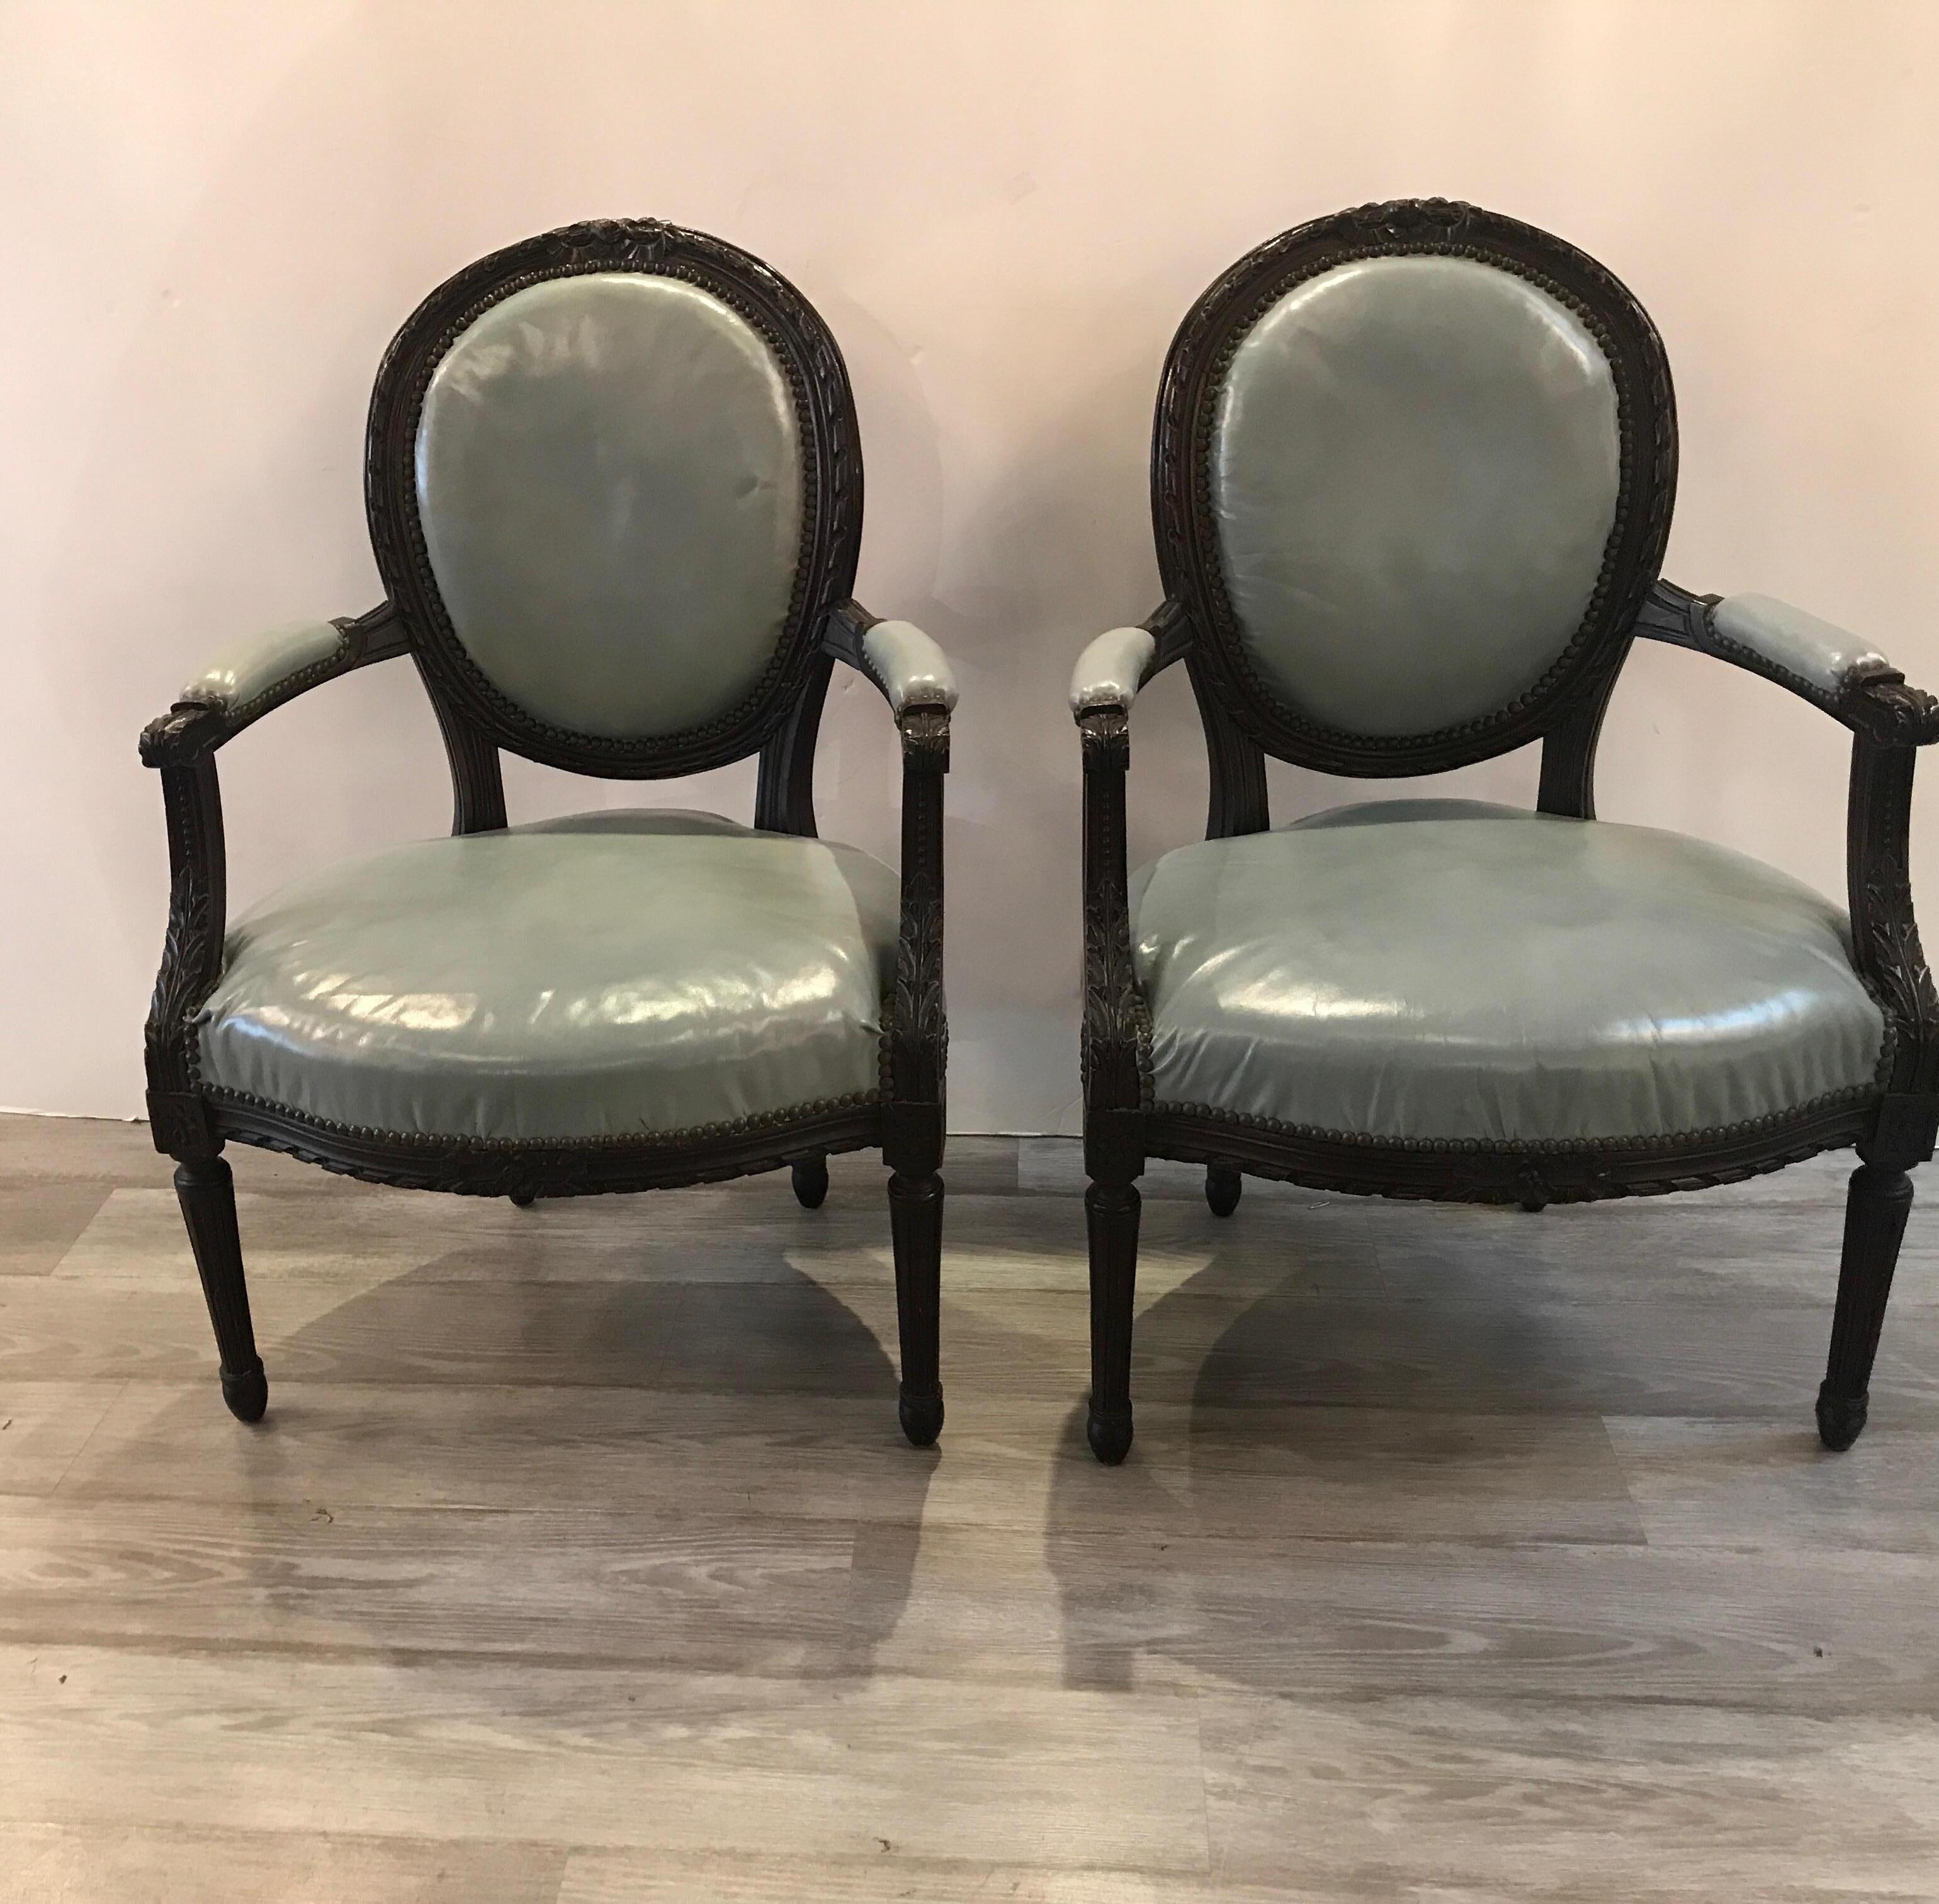 Beautiful hand carved dark walnut Louis XVI style armchairs from the mid-19th century. The Classic form with hand carved detail all around with robins egg blue leather in good condition but new upholstery will make this pair of chairs exceptional.